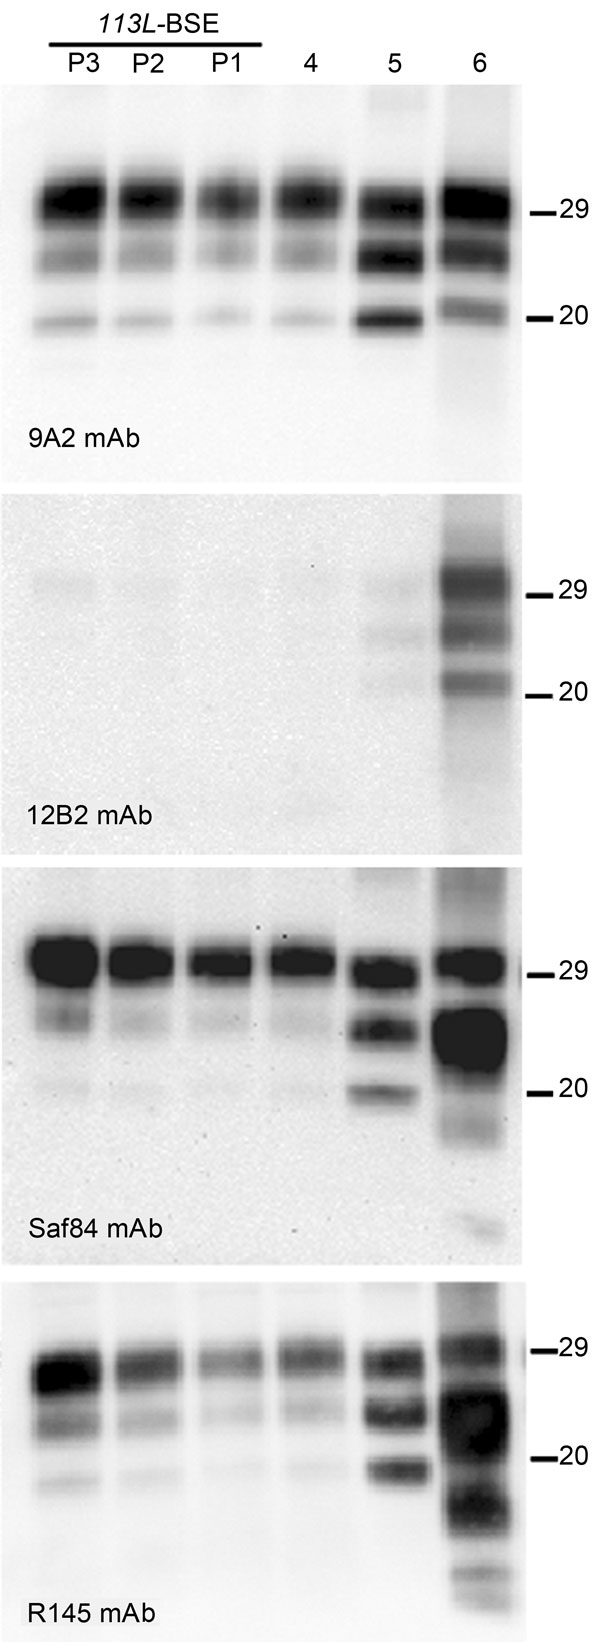 Comparative Western blot analyses of brain prion protein resistant to proteinase K digestion (PrPres) from BoPrP-Tg110 mice infected with bovine spongiform encephalopathy (BSE)-C, 113L-BSE, BSE-L, and BSE-H prions. Mice infected with newly generated 113L-BSE prion at first (P1), second (P2), and third (P3) passages are compared with mice infected with BSE-C (P1) (lane 4); BSE-L (P1) (lane 5); and BSE-H (P1) (lane 6) prions. Each panel was identified by using the monoclonal antibody (mAb) listed 